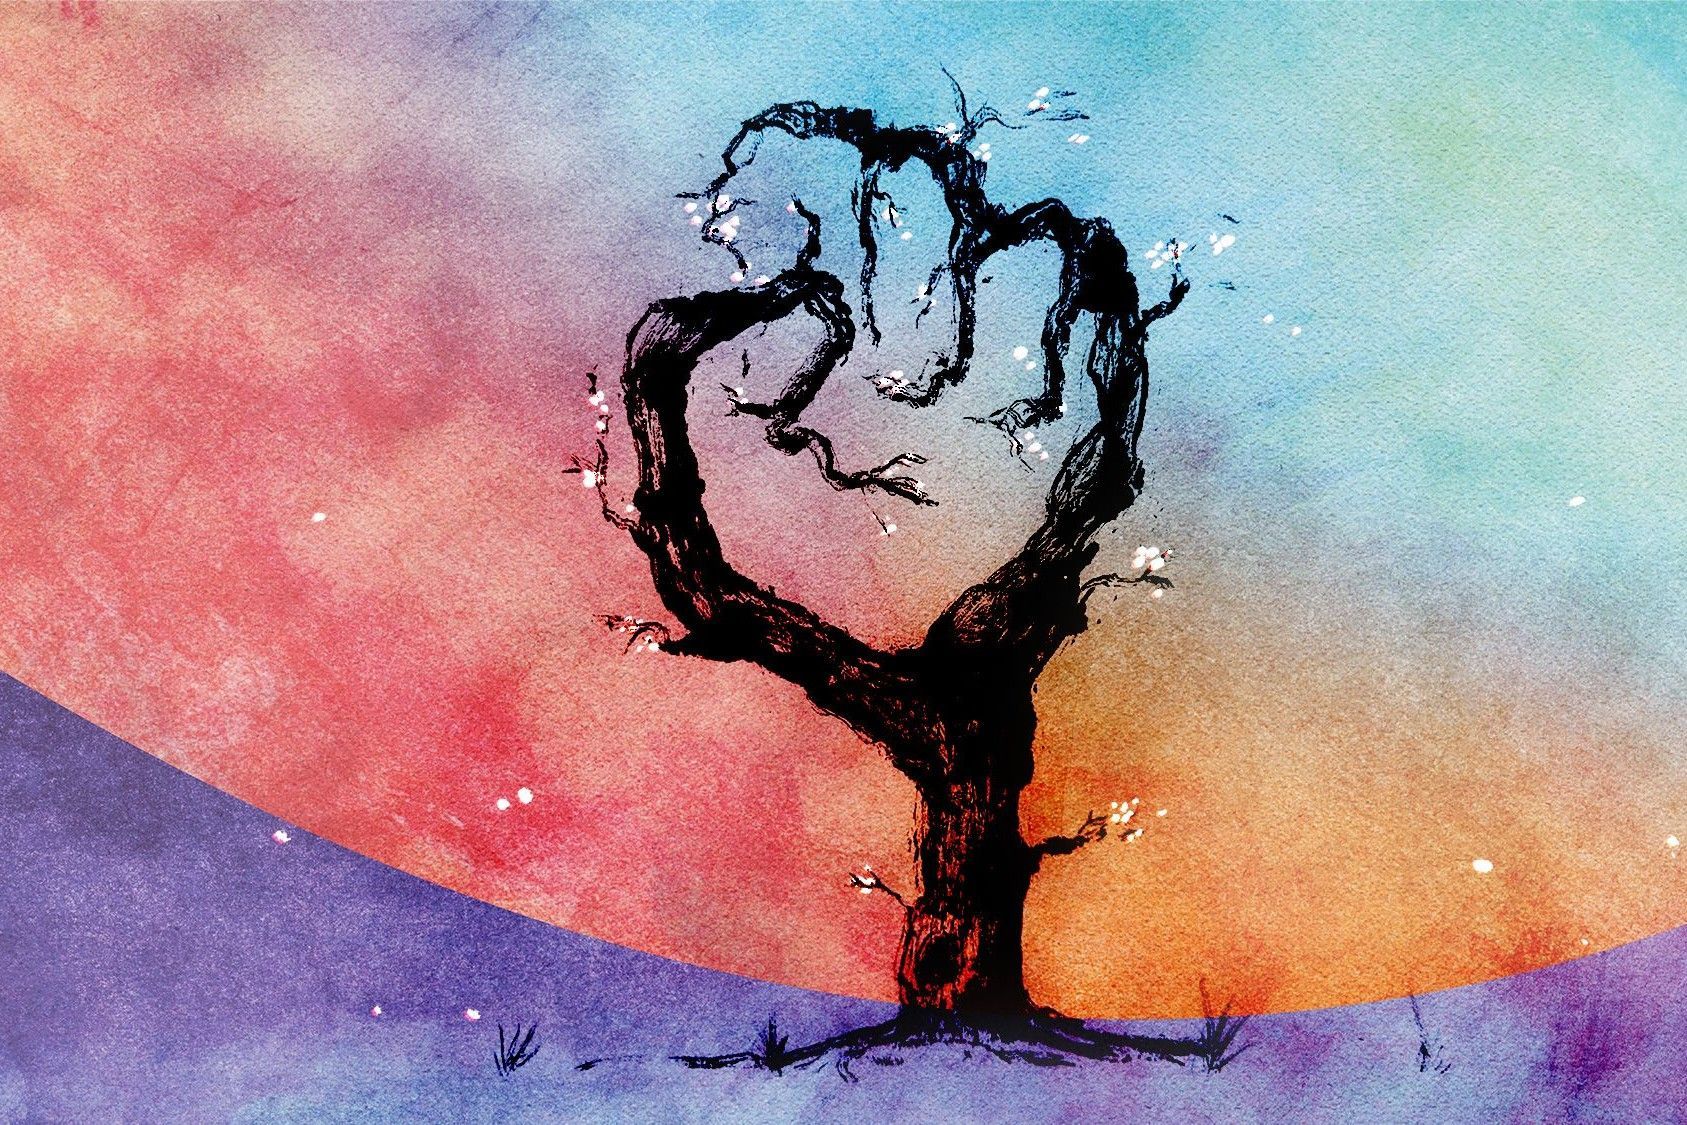 Abstract tree with branches shaped in a fist with white blossoms and a multi-color watercolor background.